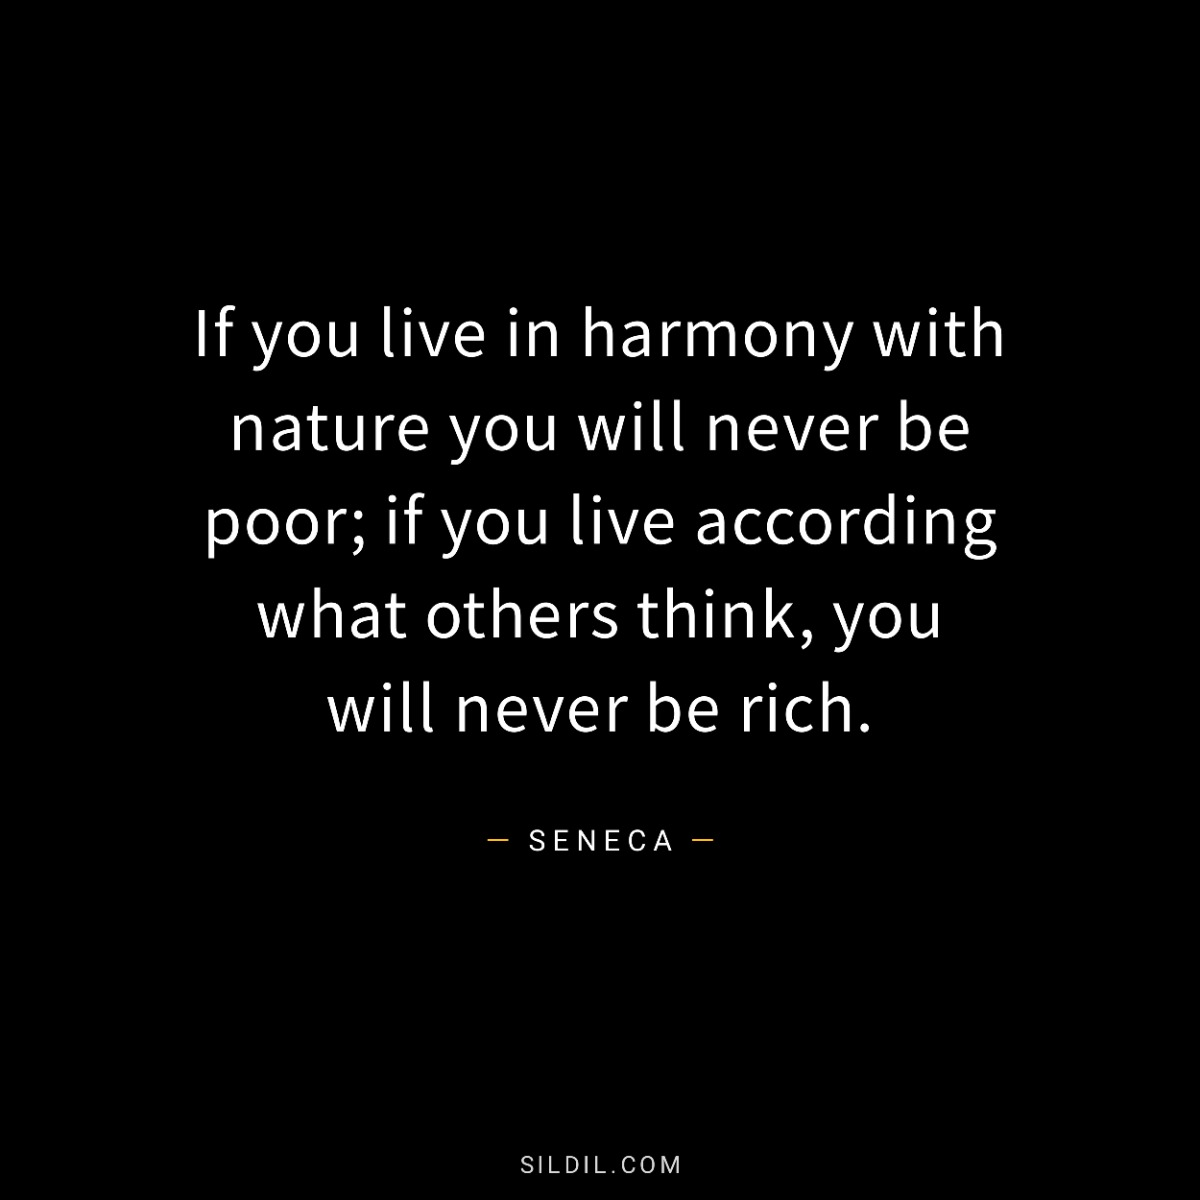 If you live in harmony with nature you will never be poor; if you live according what others think, you will never be rich.